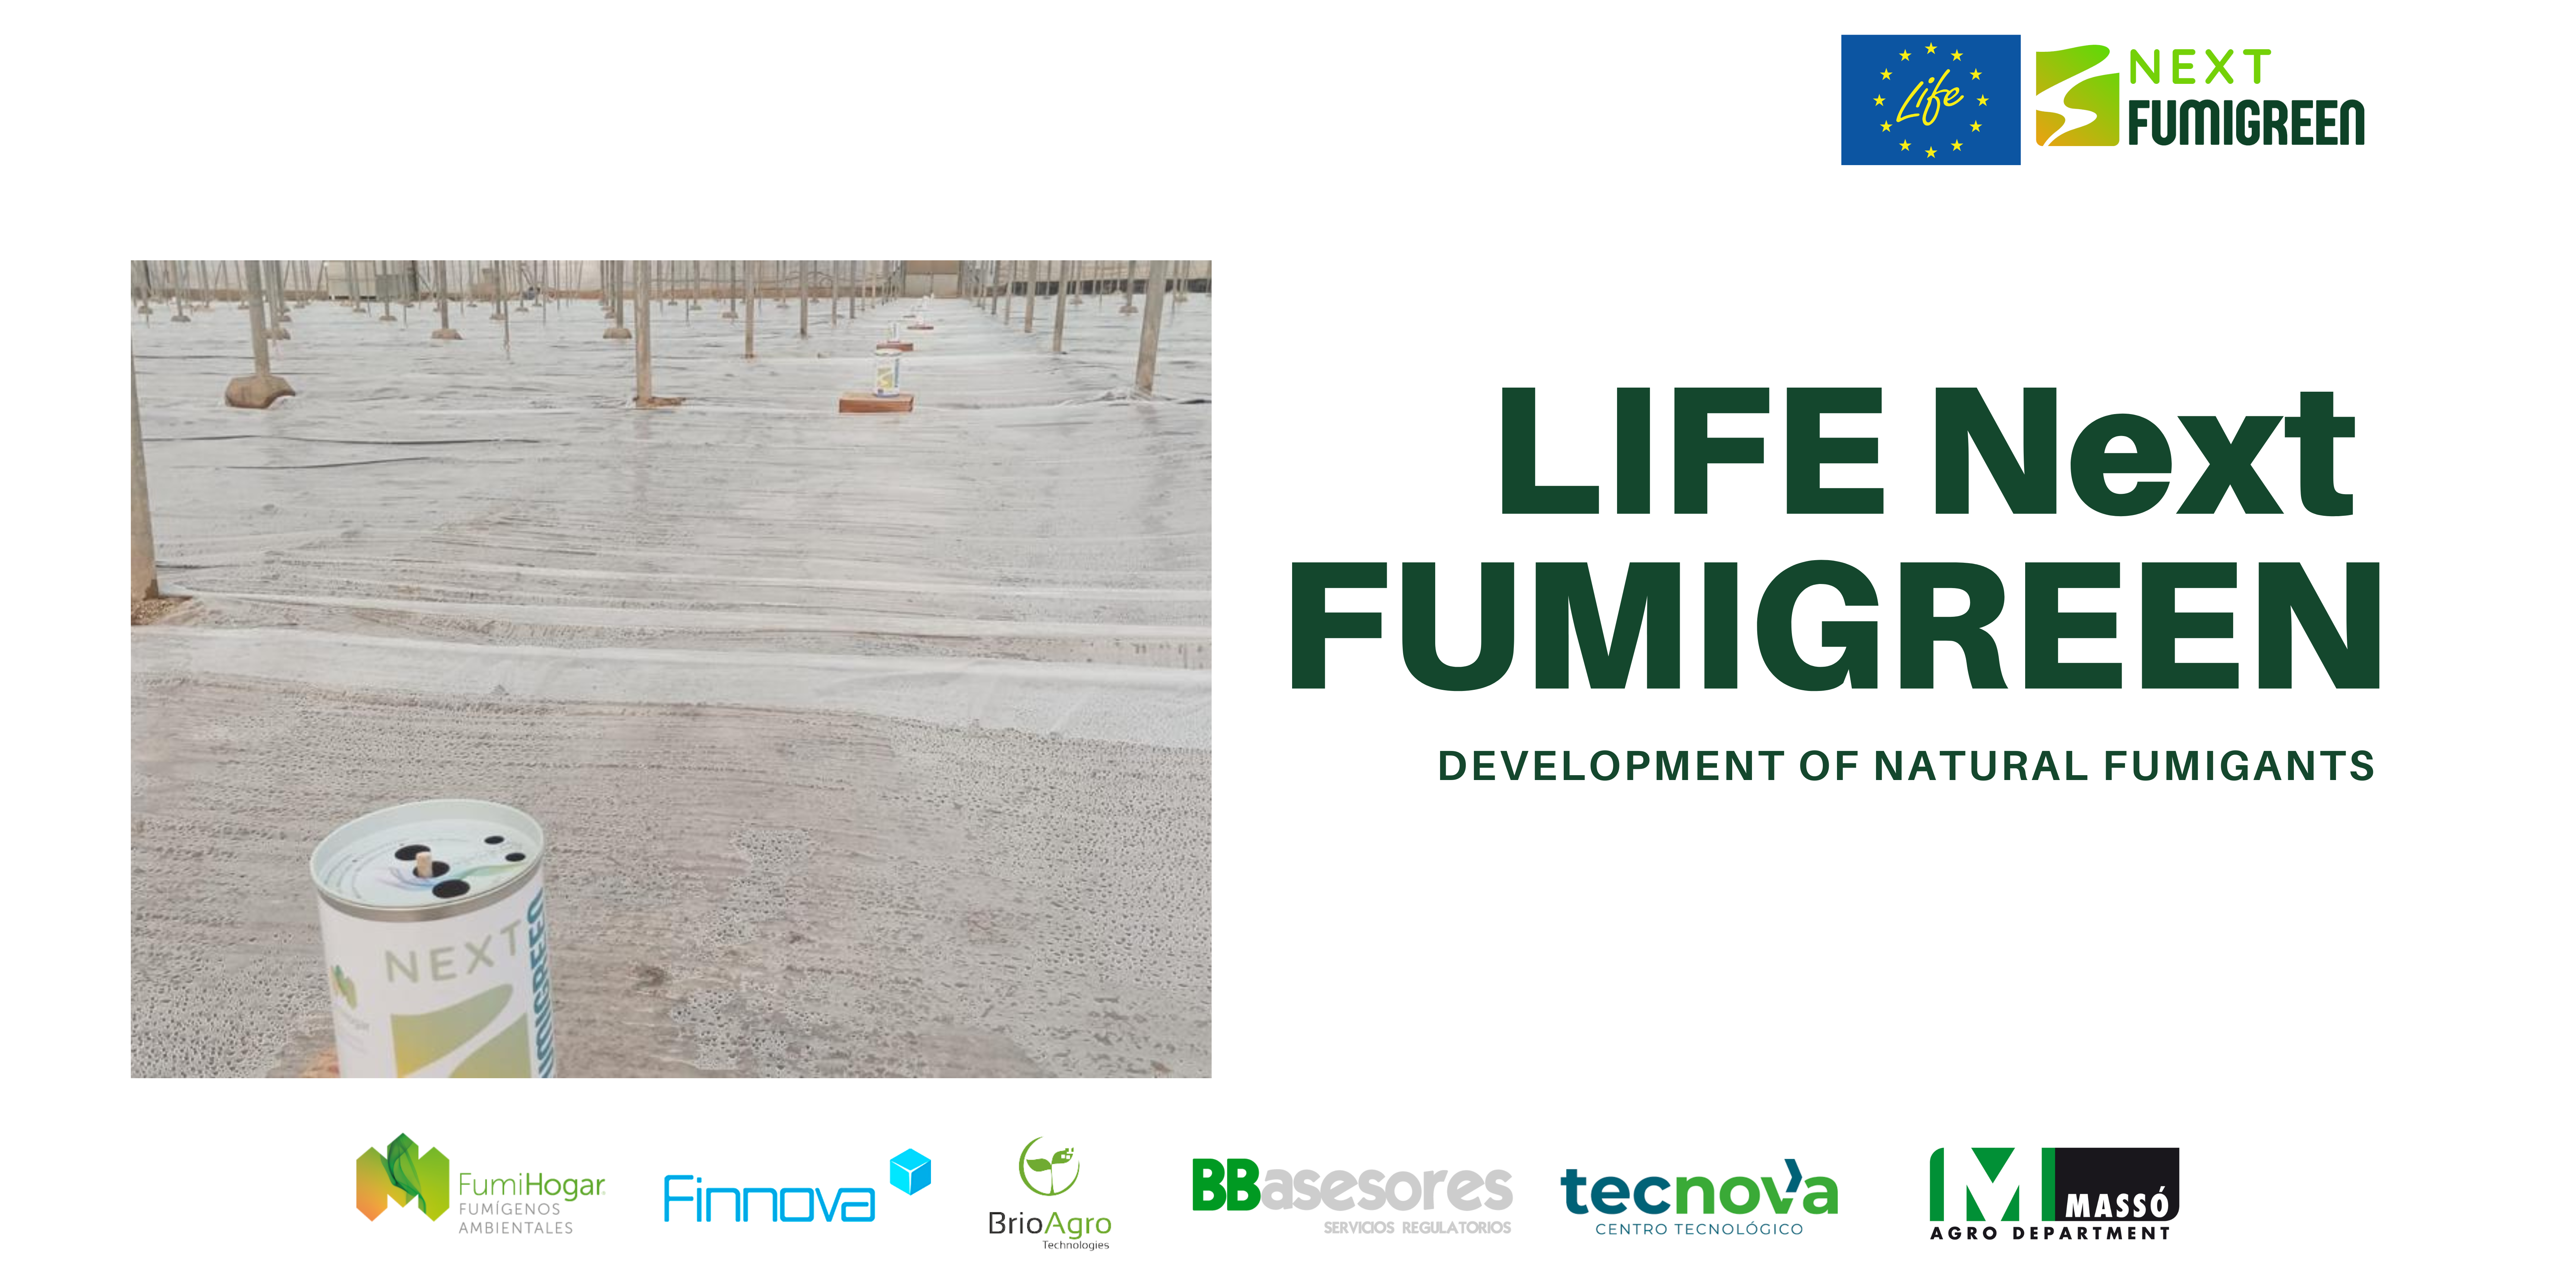 LIFE NextFUMIGREEN project, solution to the withdrawal of the EU proposal on the sustainable use of pesticides